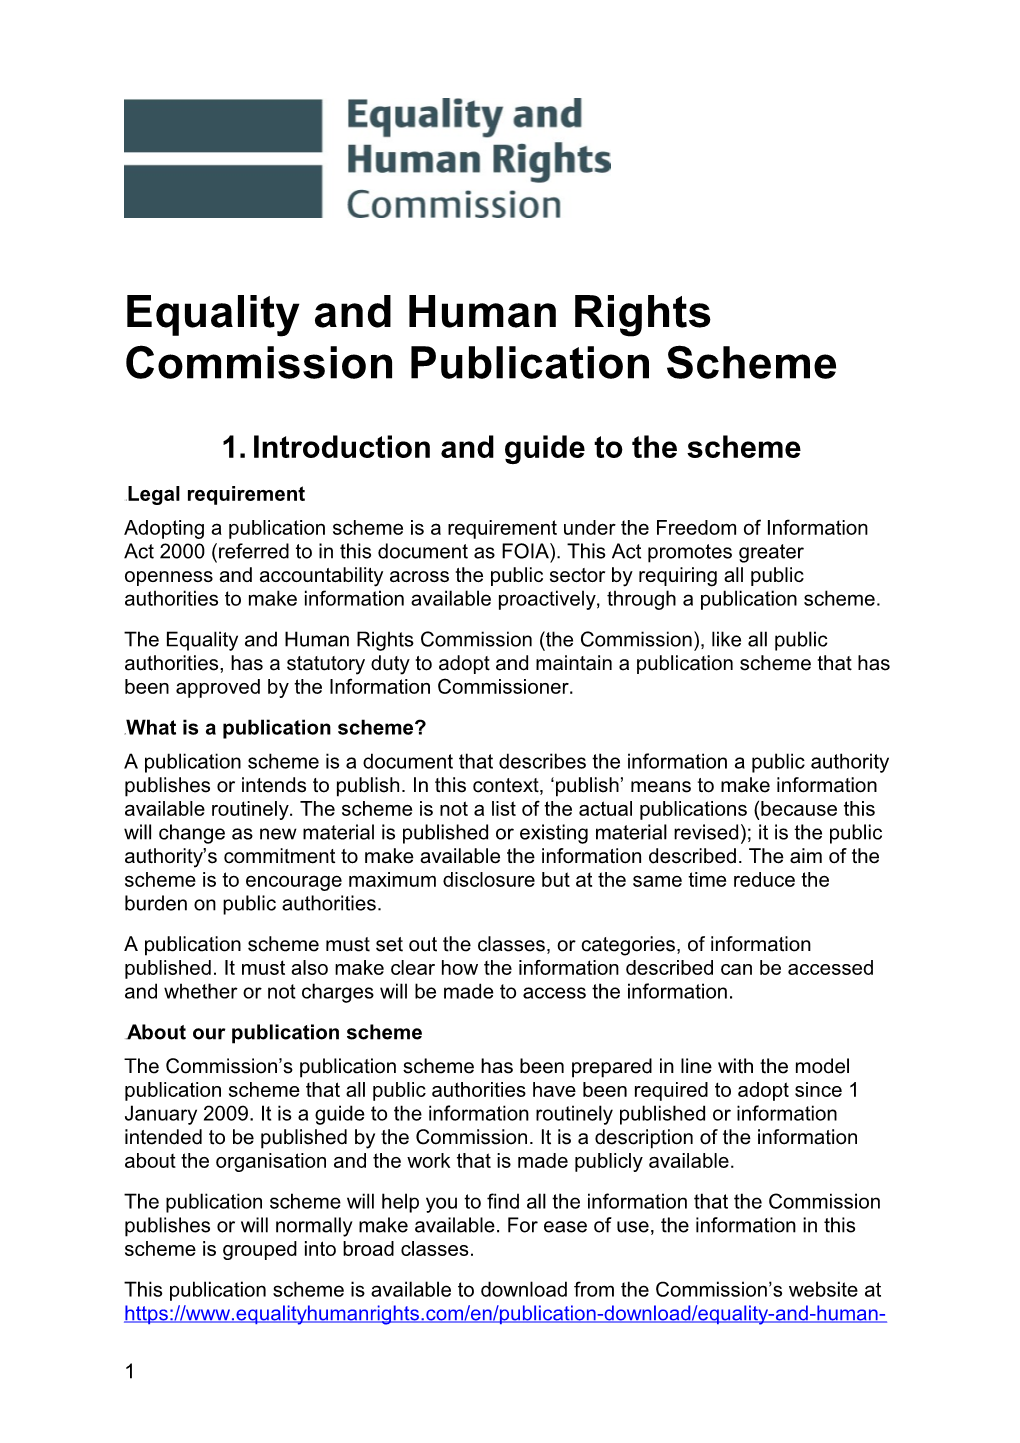 Equality and Human Rights Commission Publication Scheme